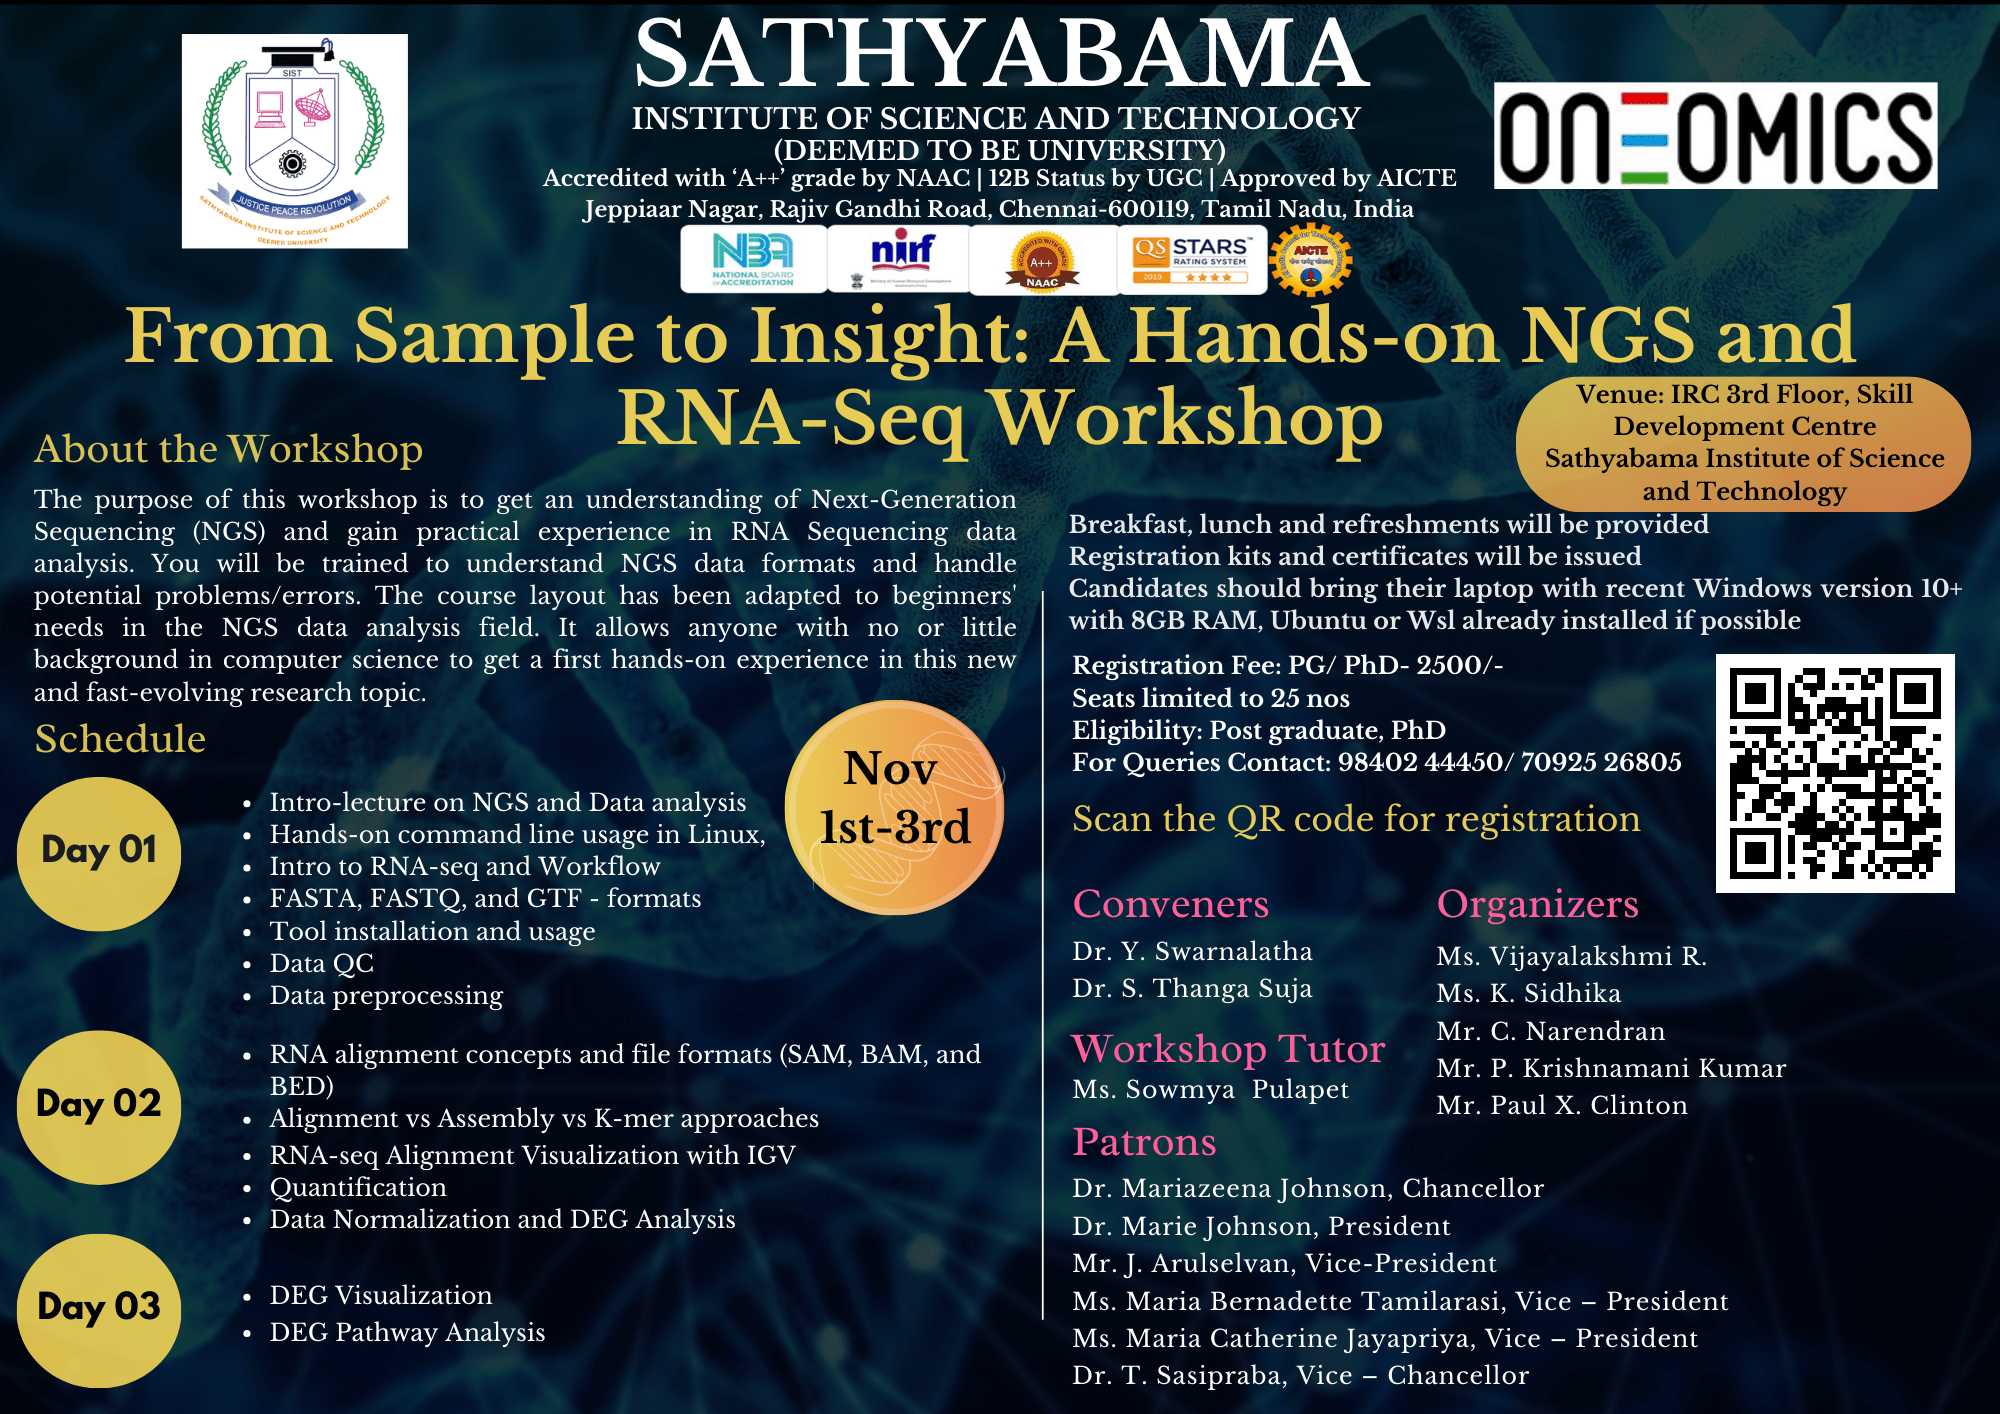 From Sample to Insight: A Hands-on NGS and RNA-Seq Workshop 2023